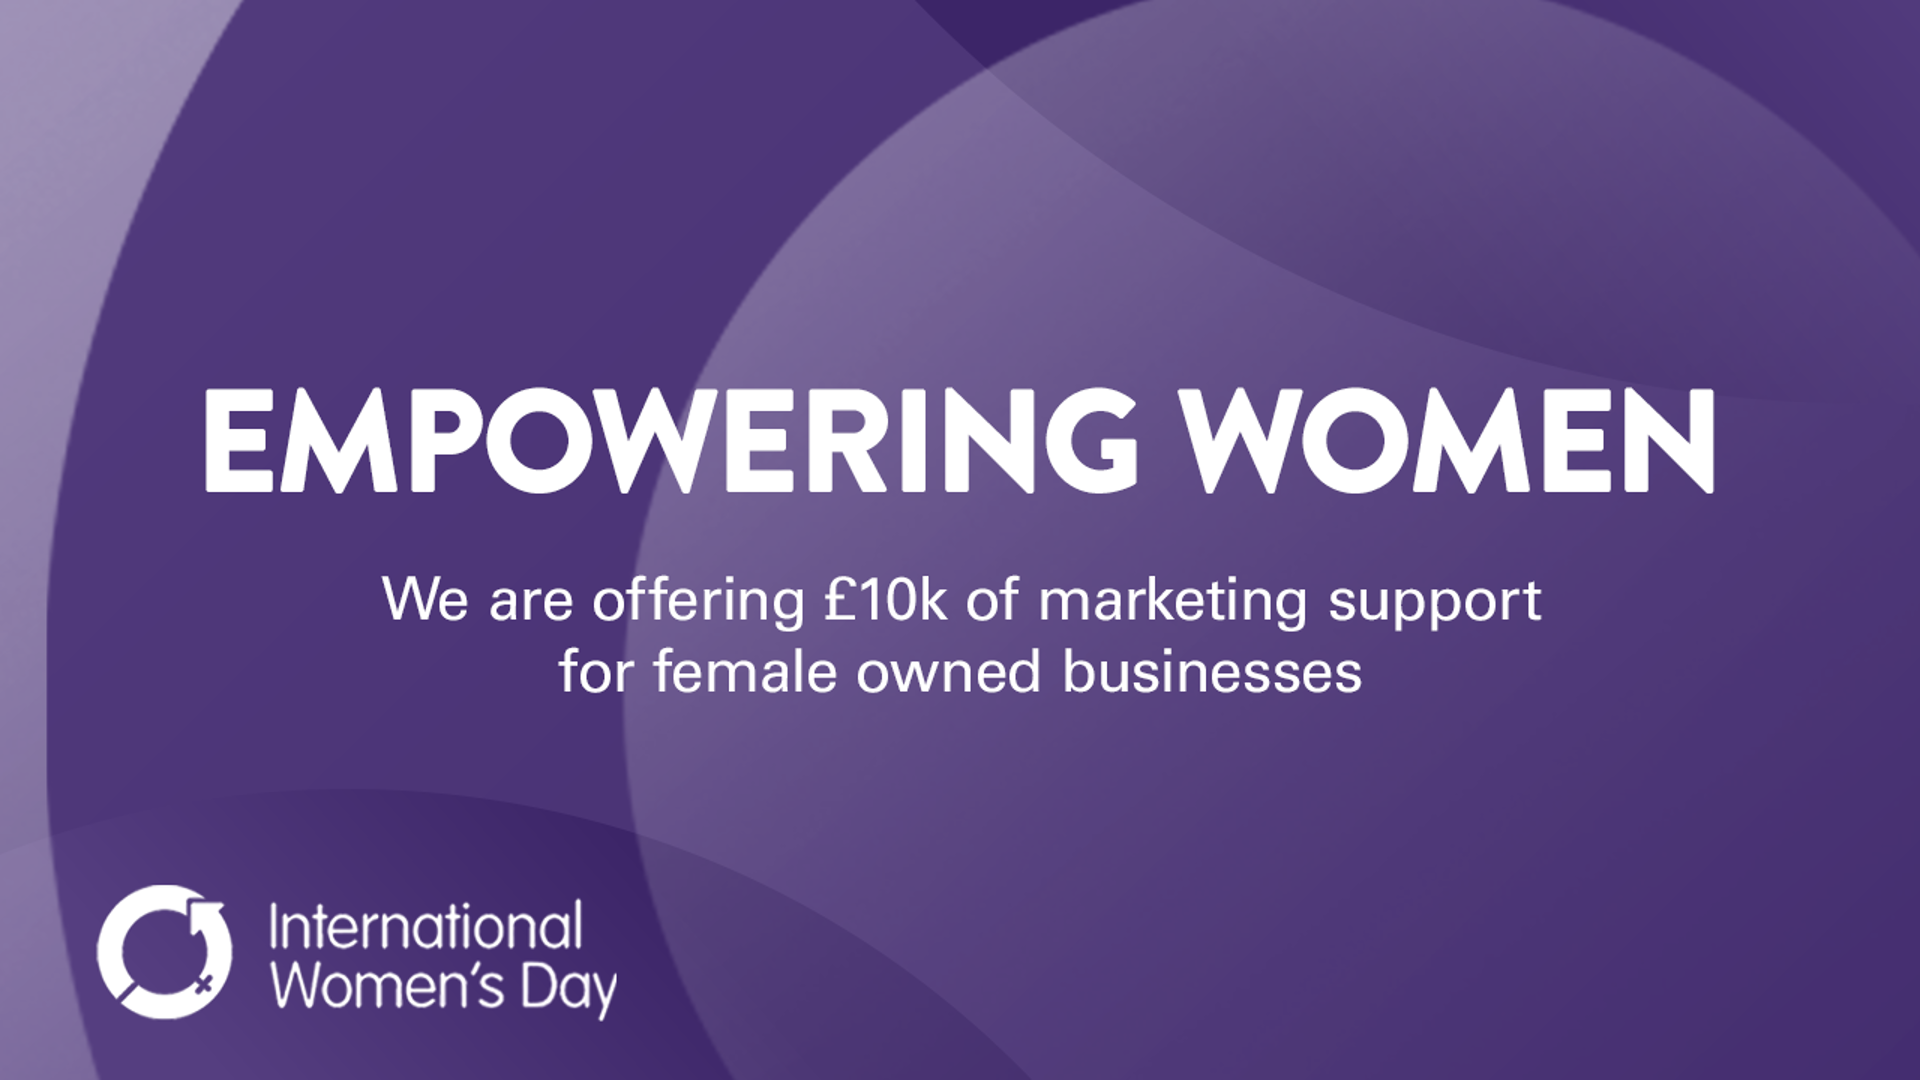 Empowering Women with marketing support